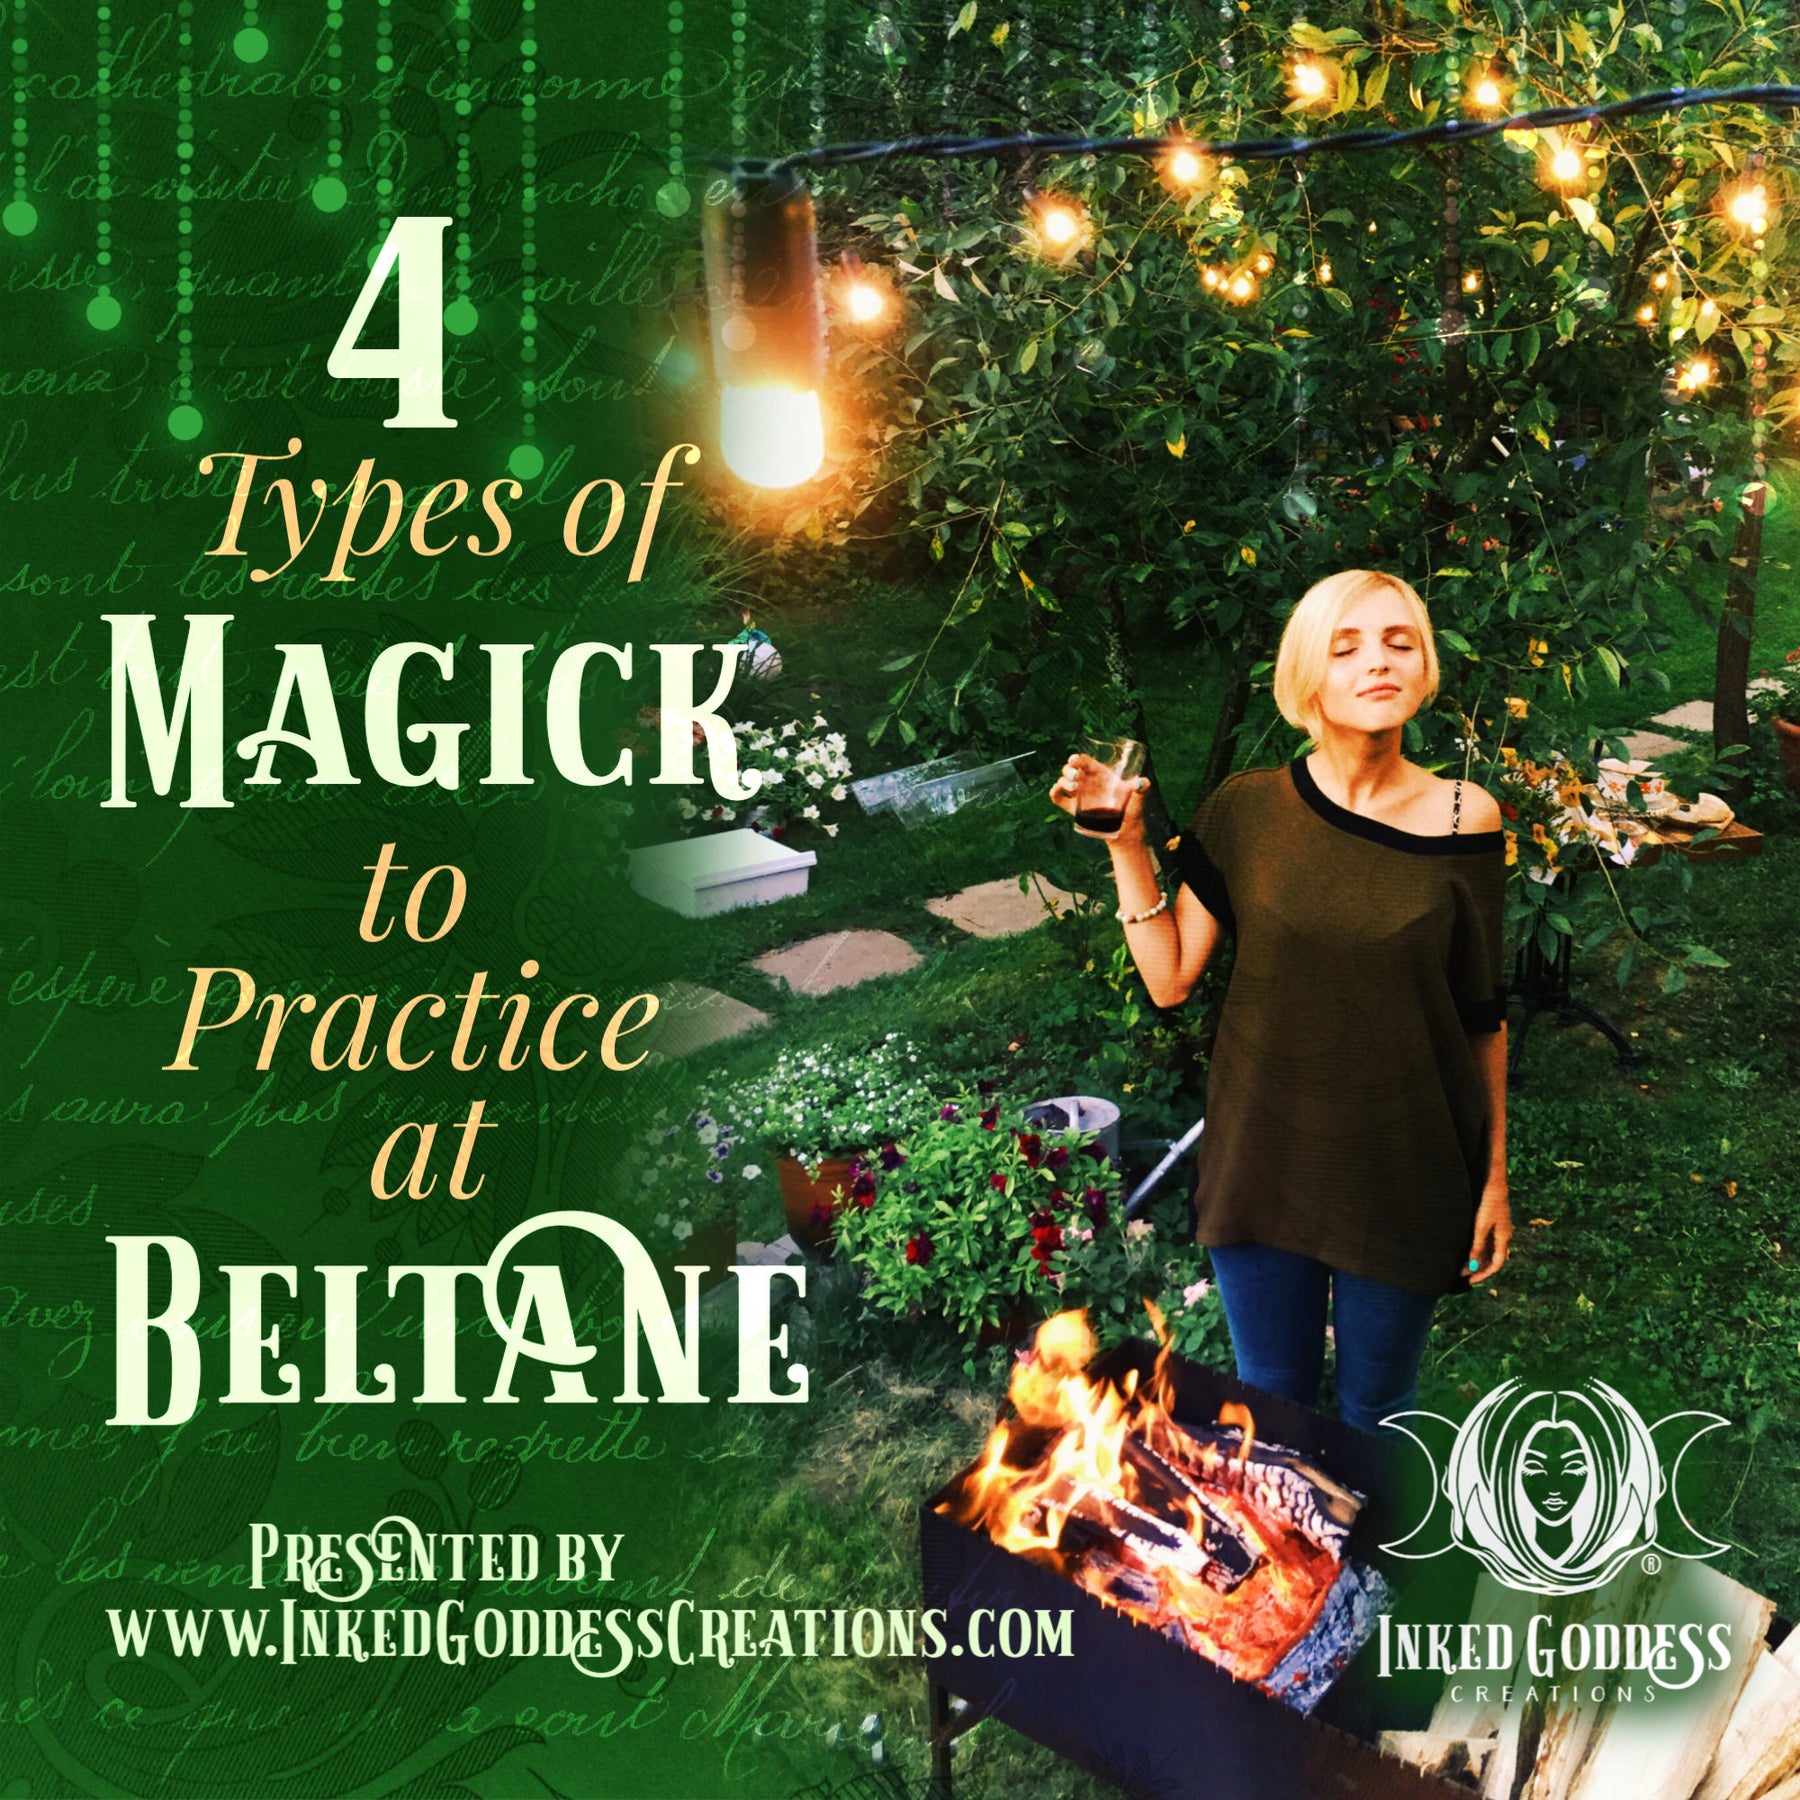 4 Types of Magick to Practice at Beltane